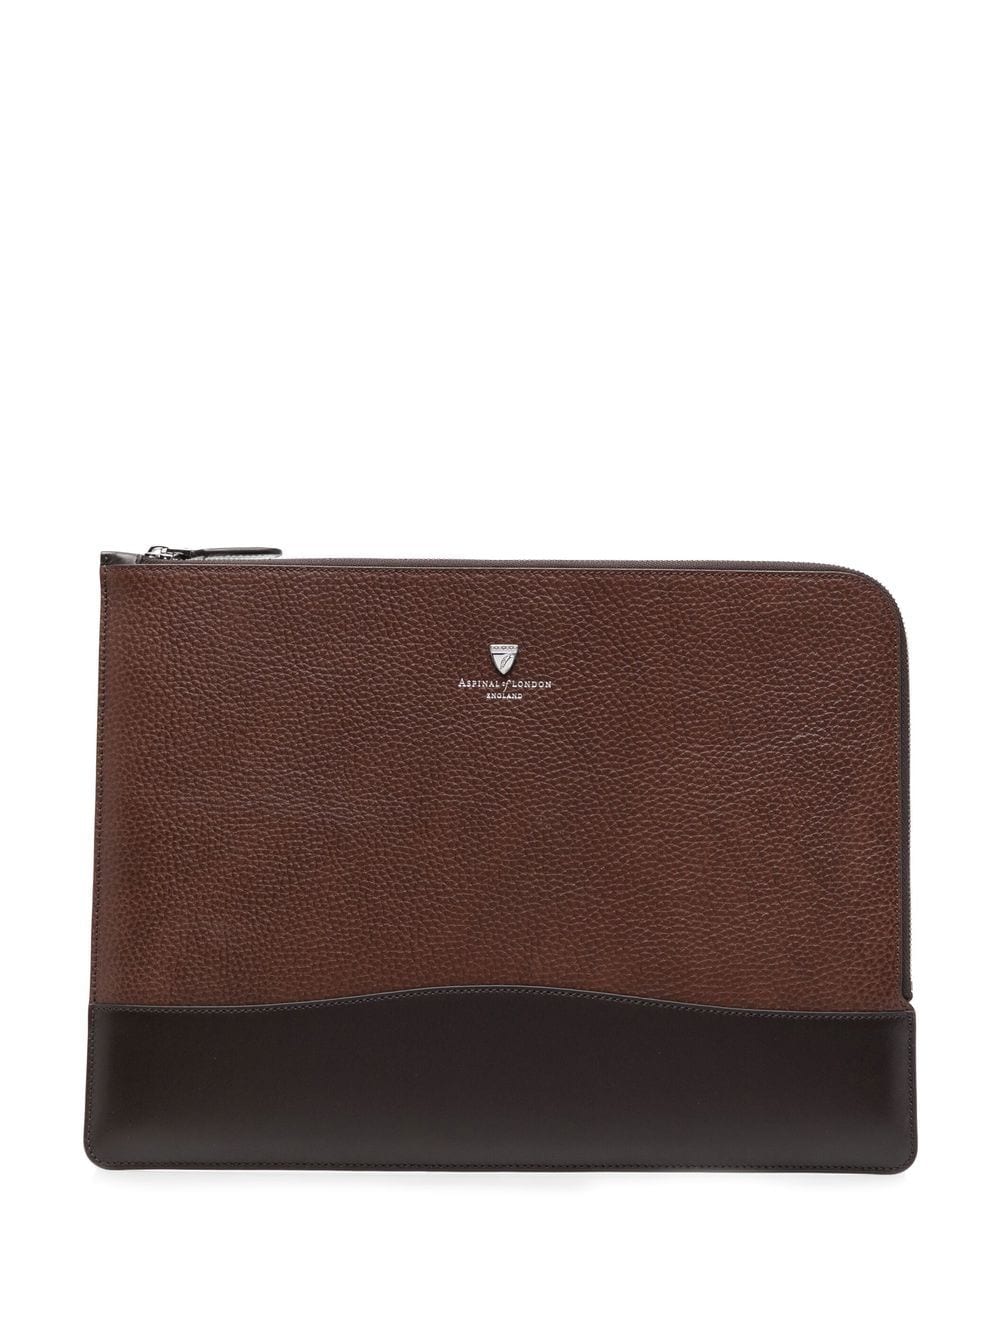 Aspinal Of London City Tech leather laptop bag - Brown von Aspinal Of London